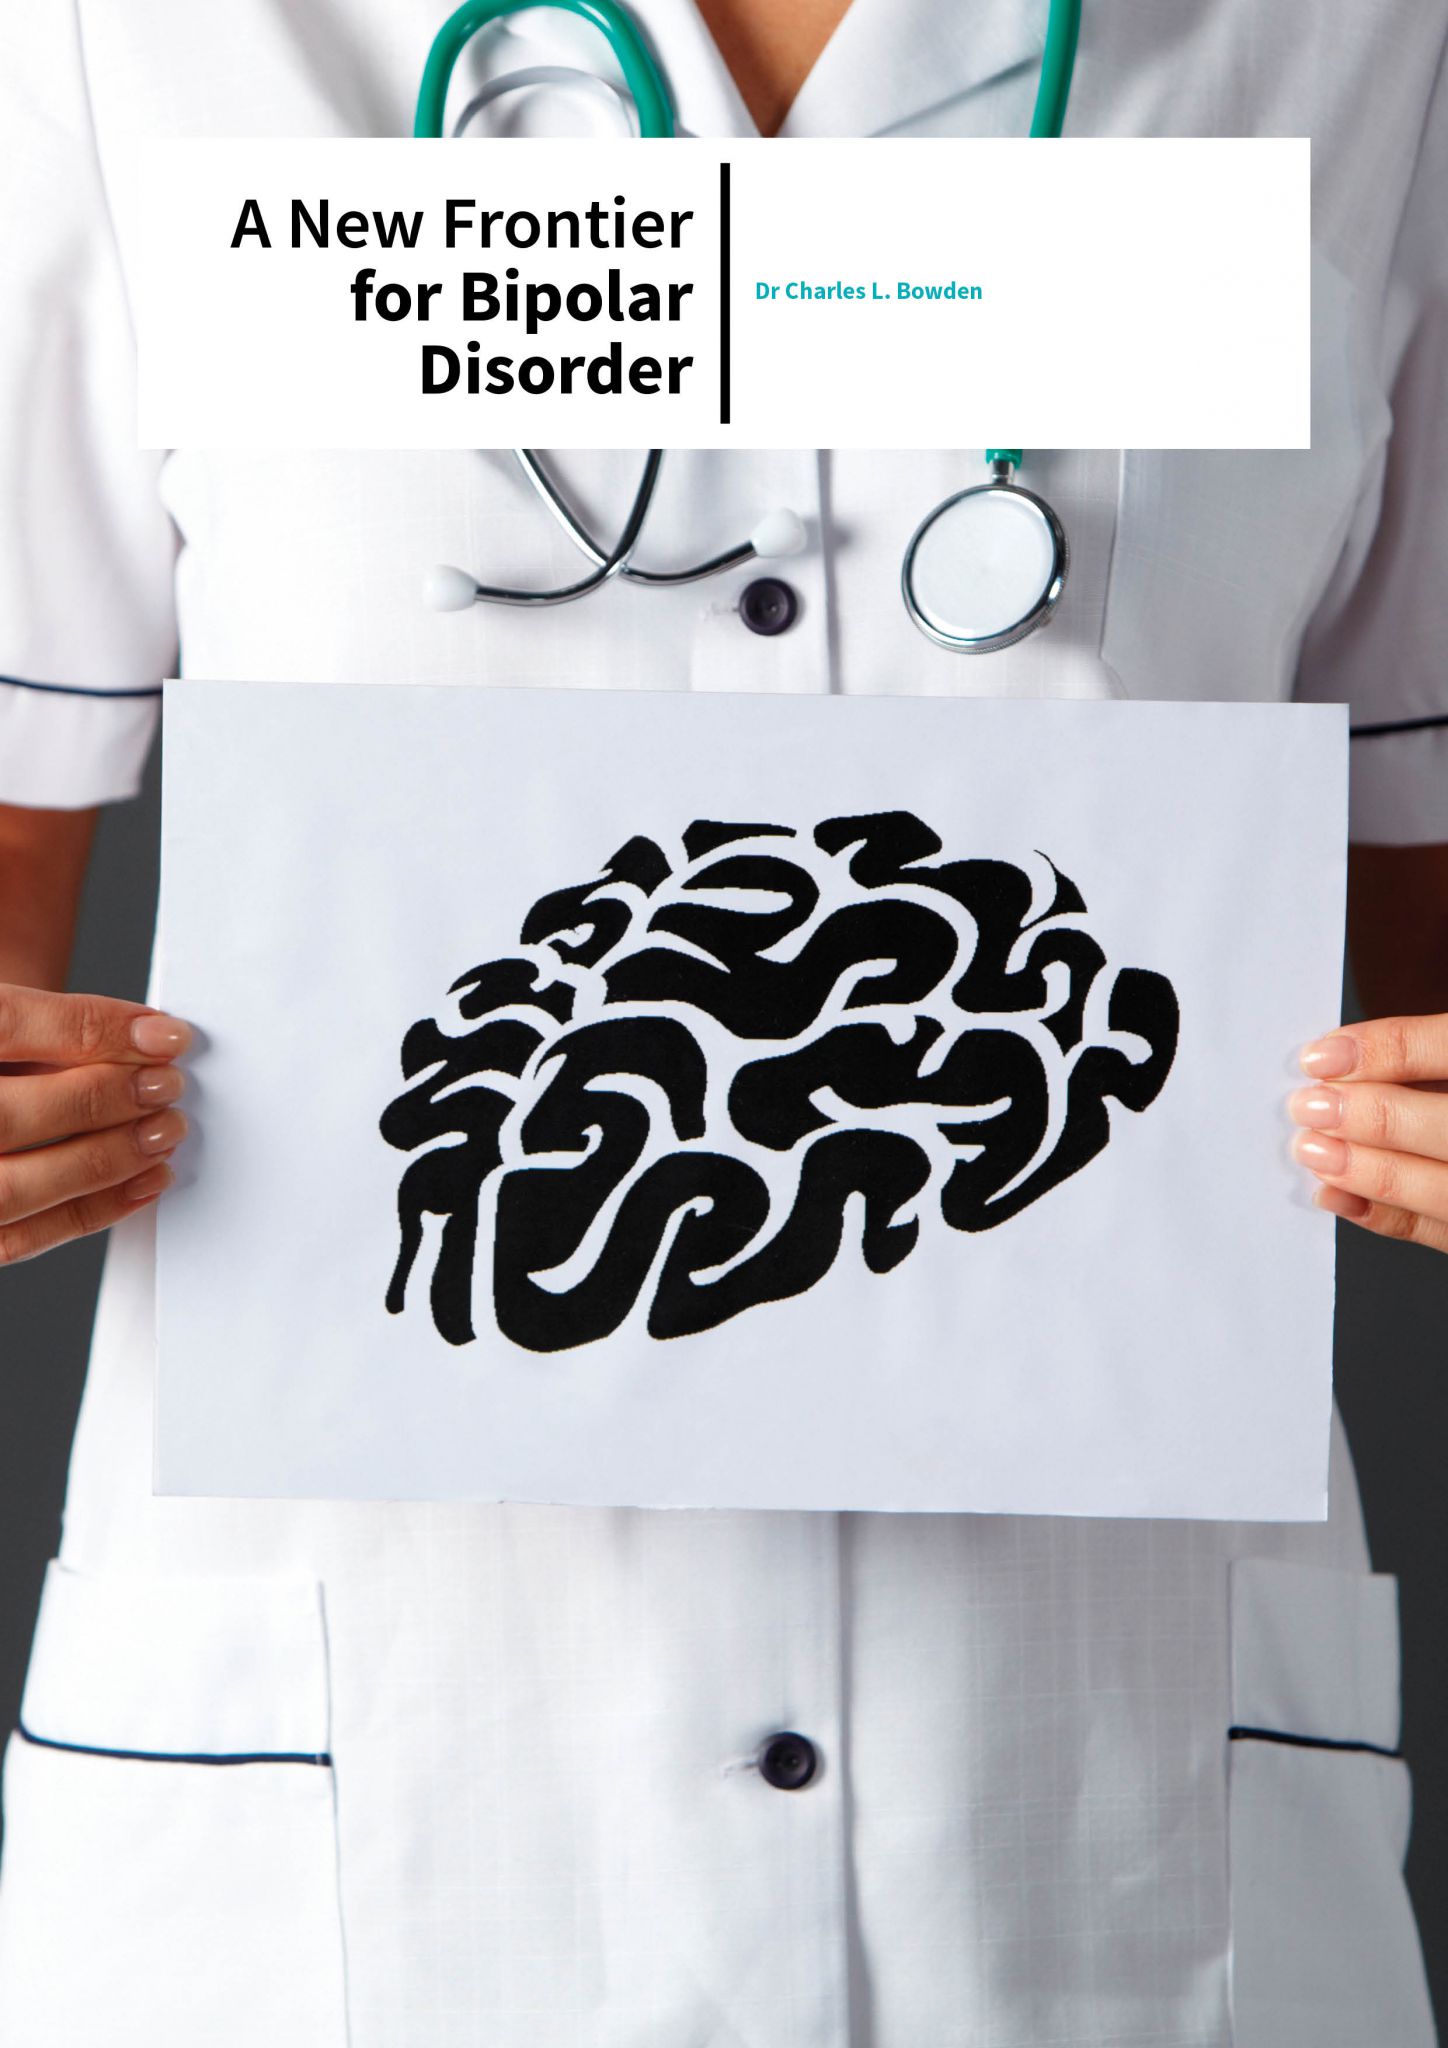 Dr Charles L. Bowden – A New Frontier For Bipolar Disorder